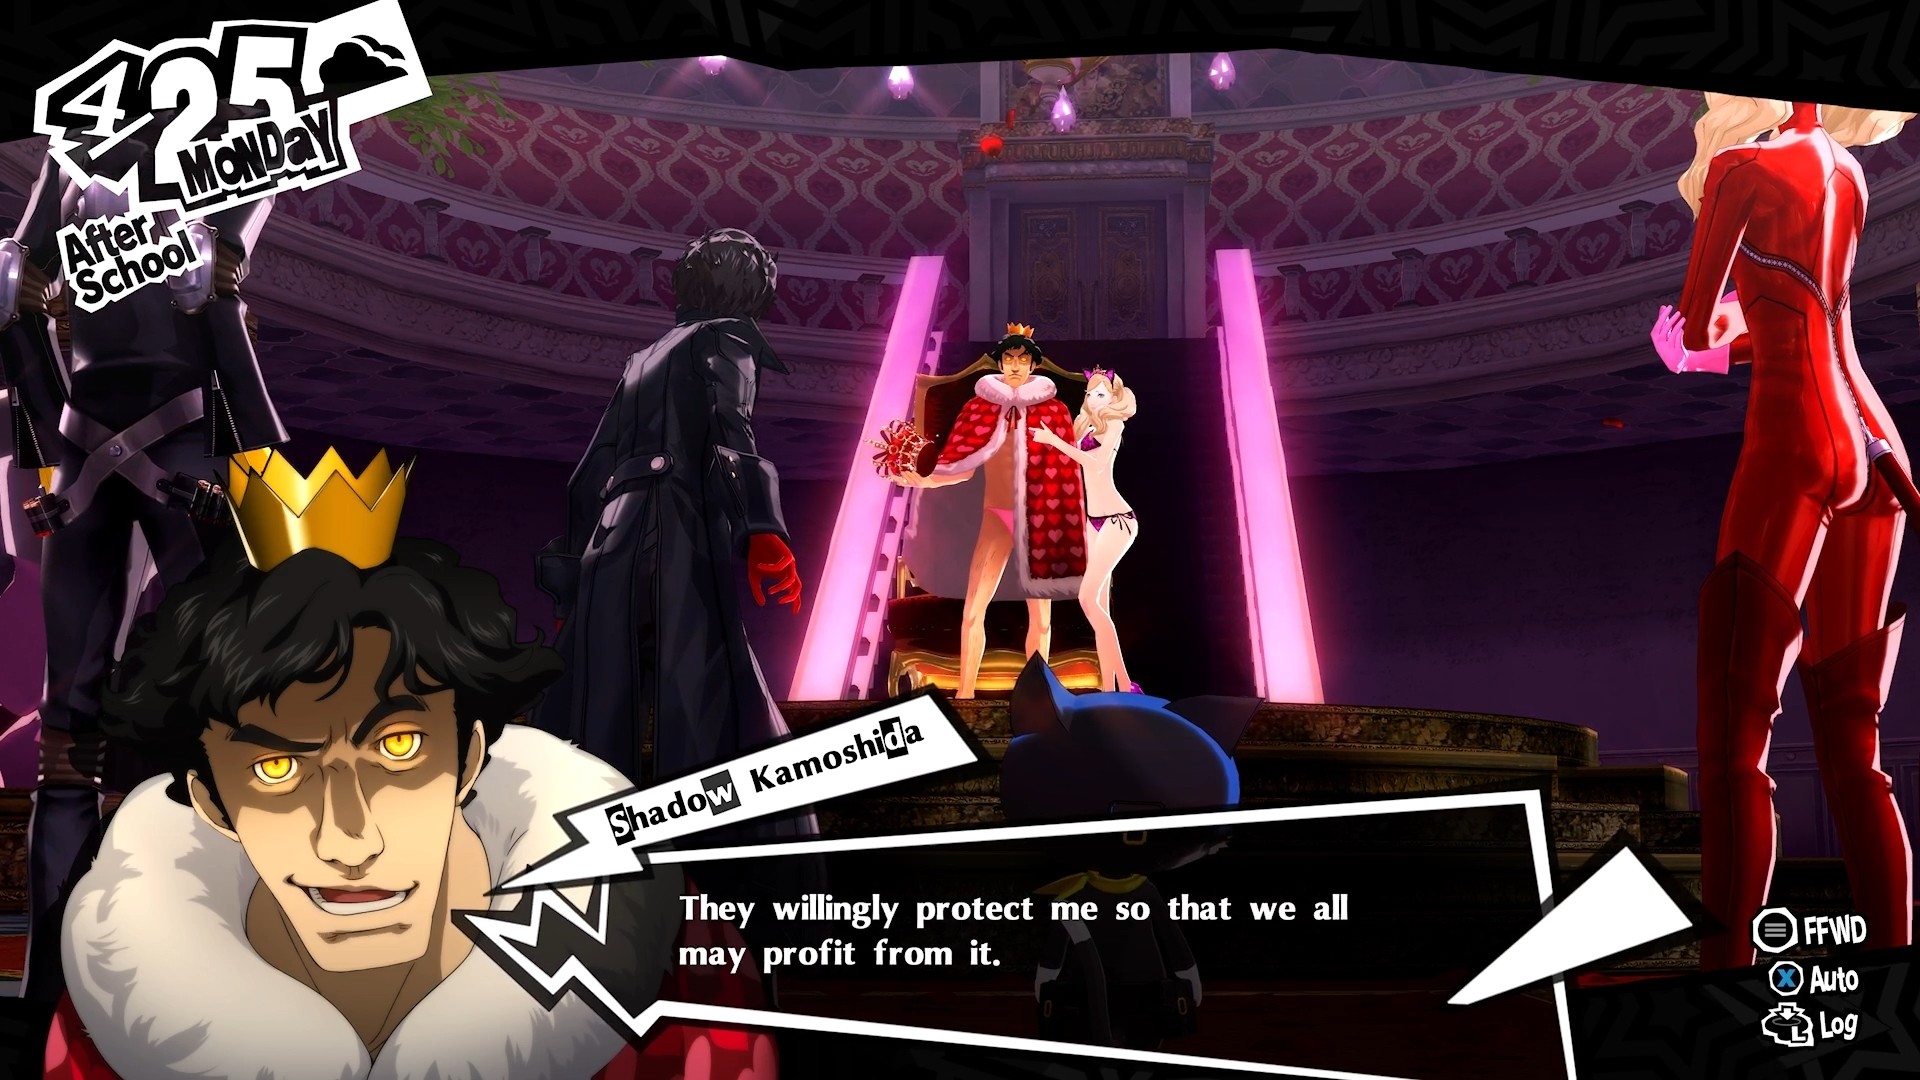 Persona 5 Royal Steam Altergift